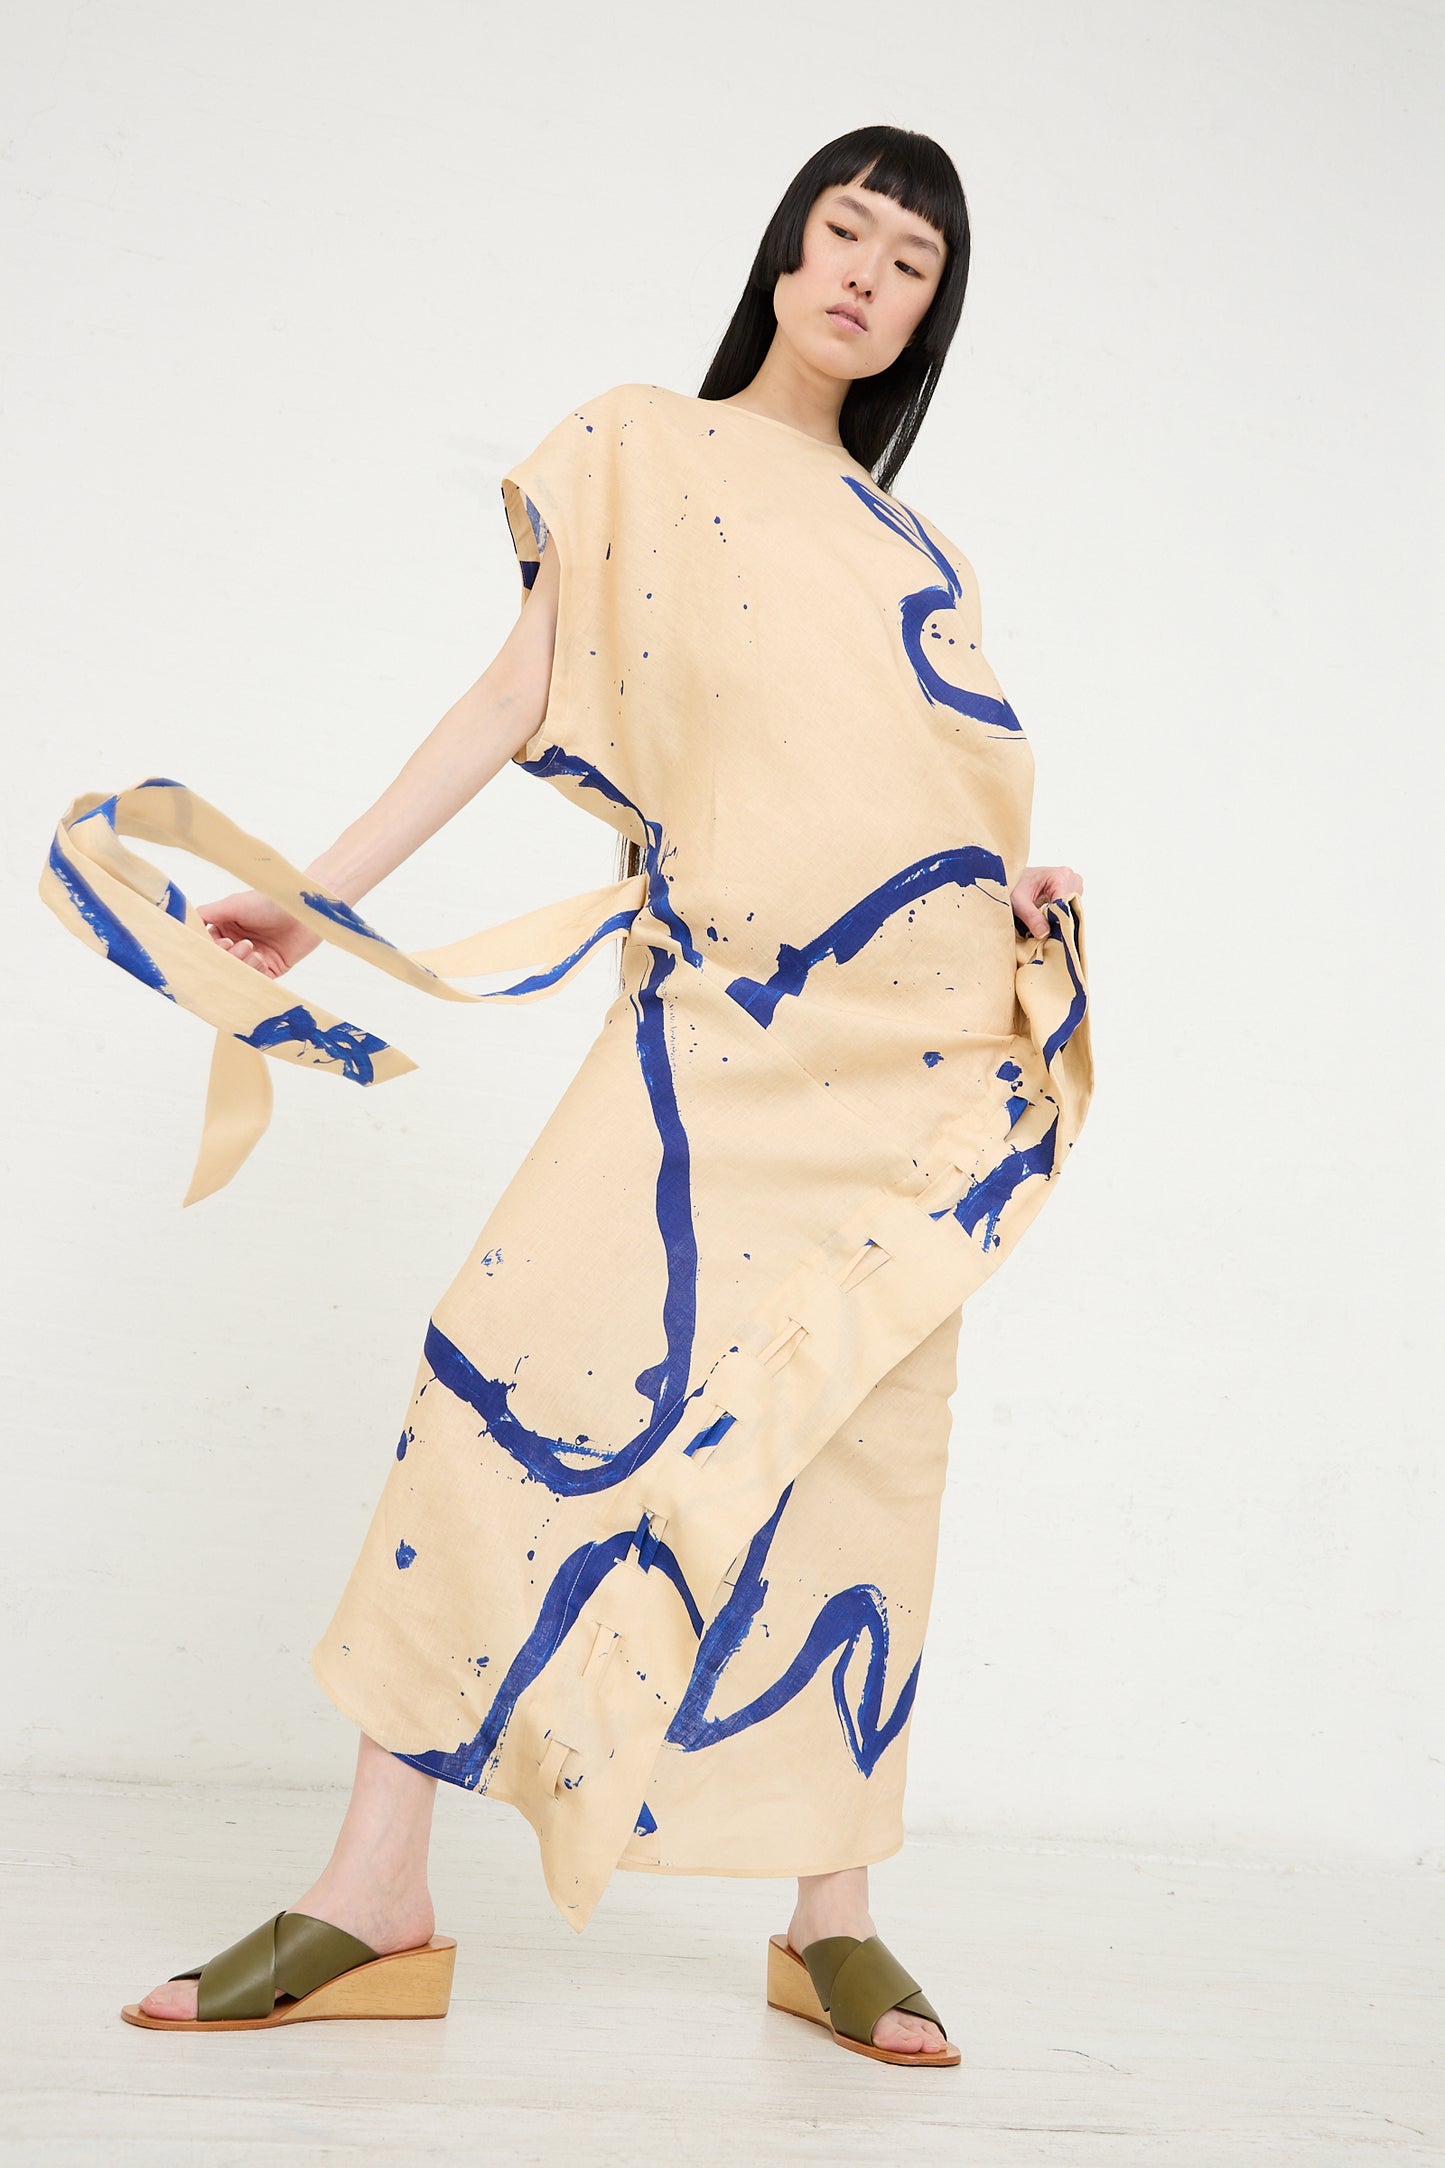 Woman posing in a Rachel Comey Regent Dress in Blush with blue abstract patterns, holding a matching belt, against a plain background.